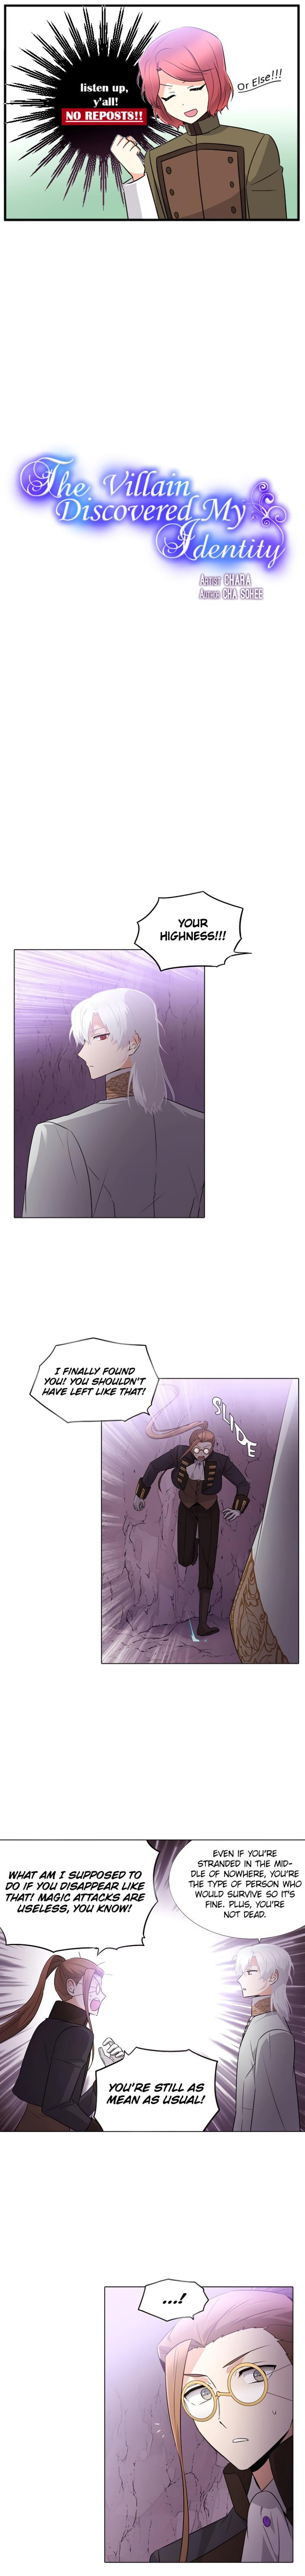 The Villain Discovered My Identity - Chapter 11 Page 1